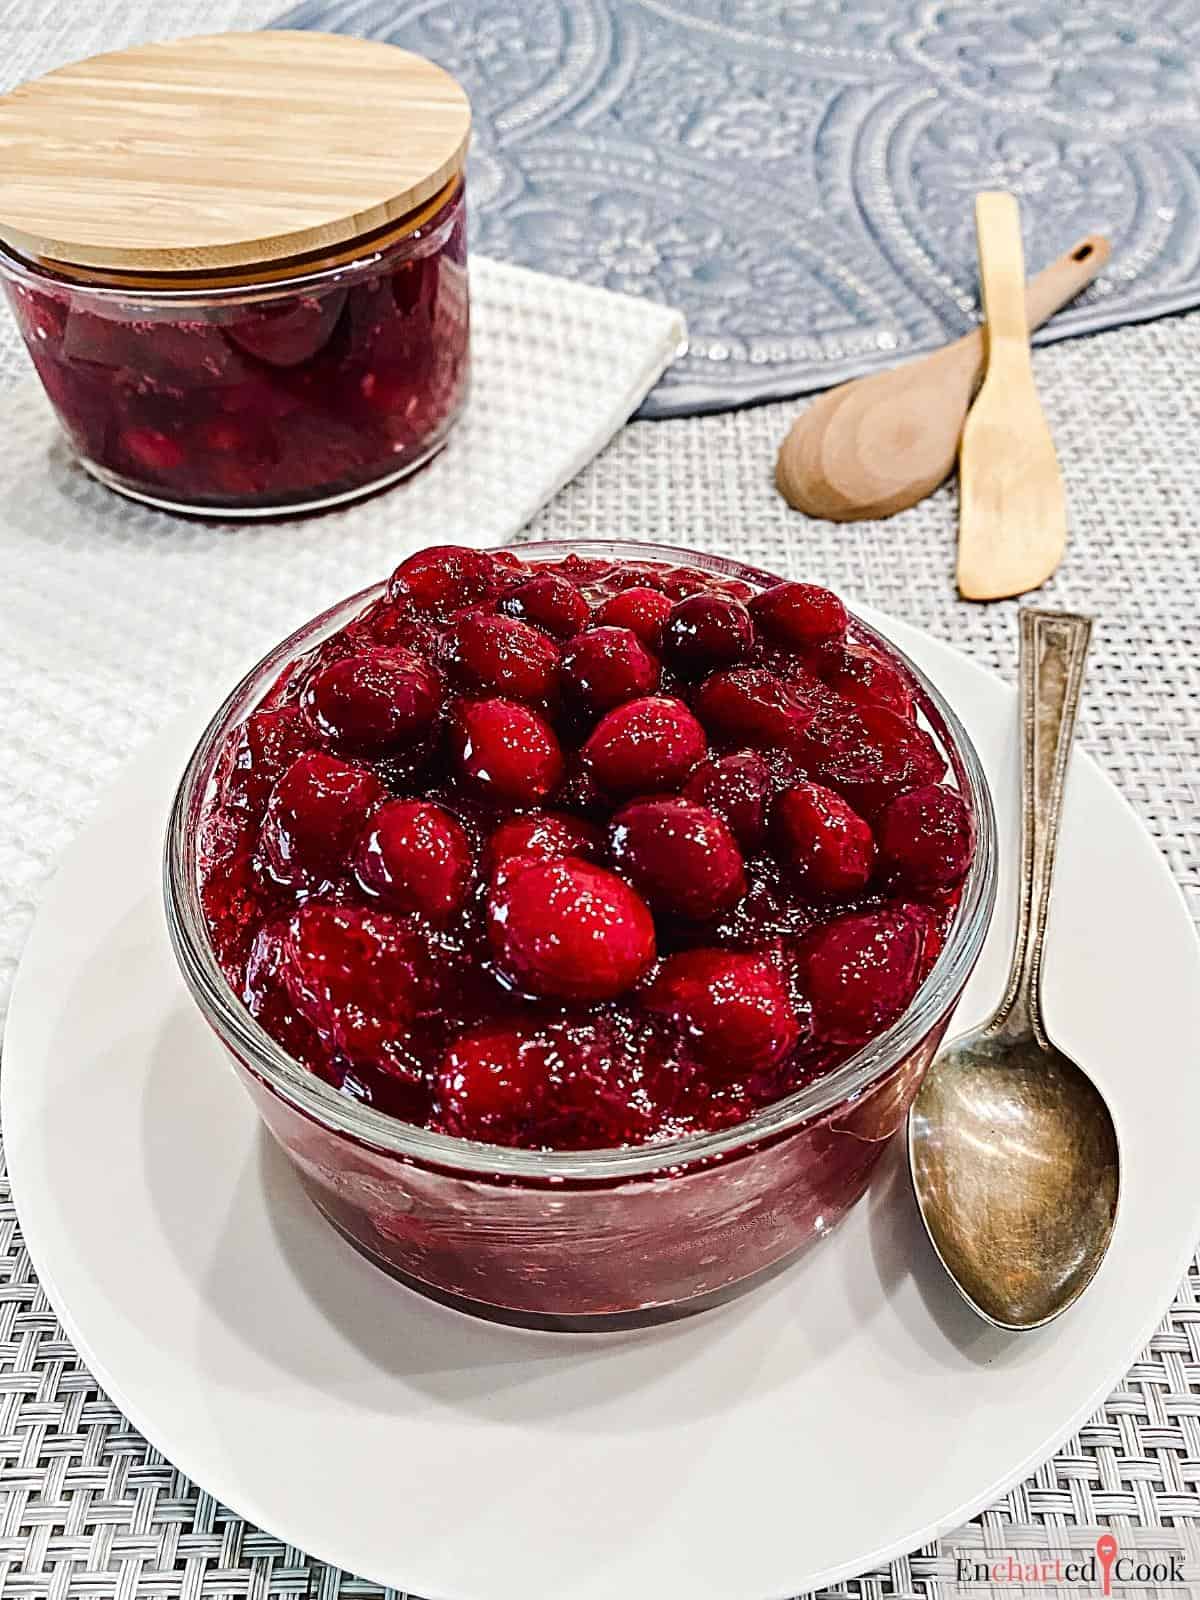 Cranberry Sauce in a glass bowl.